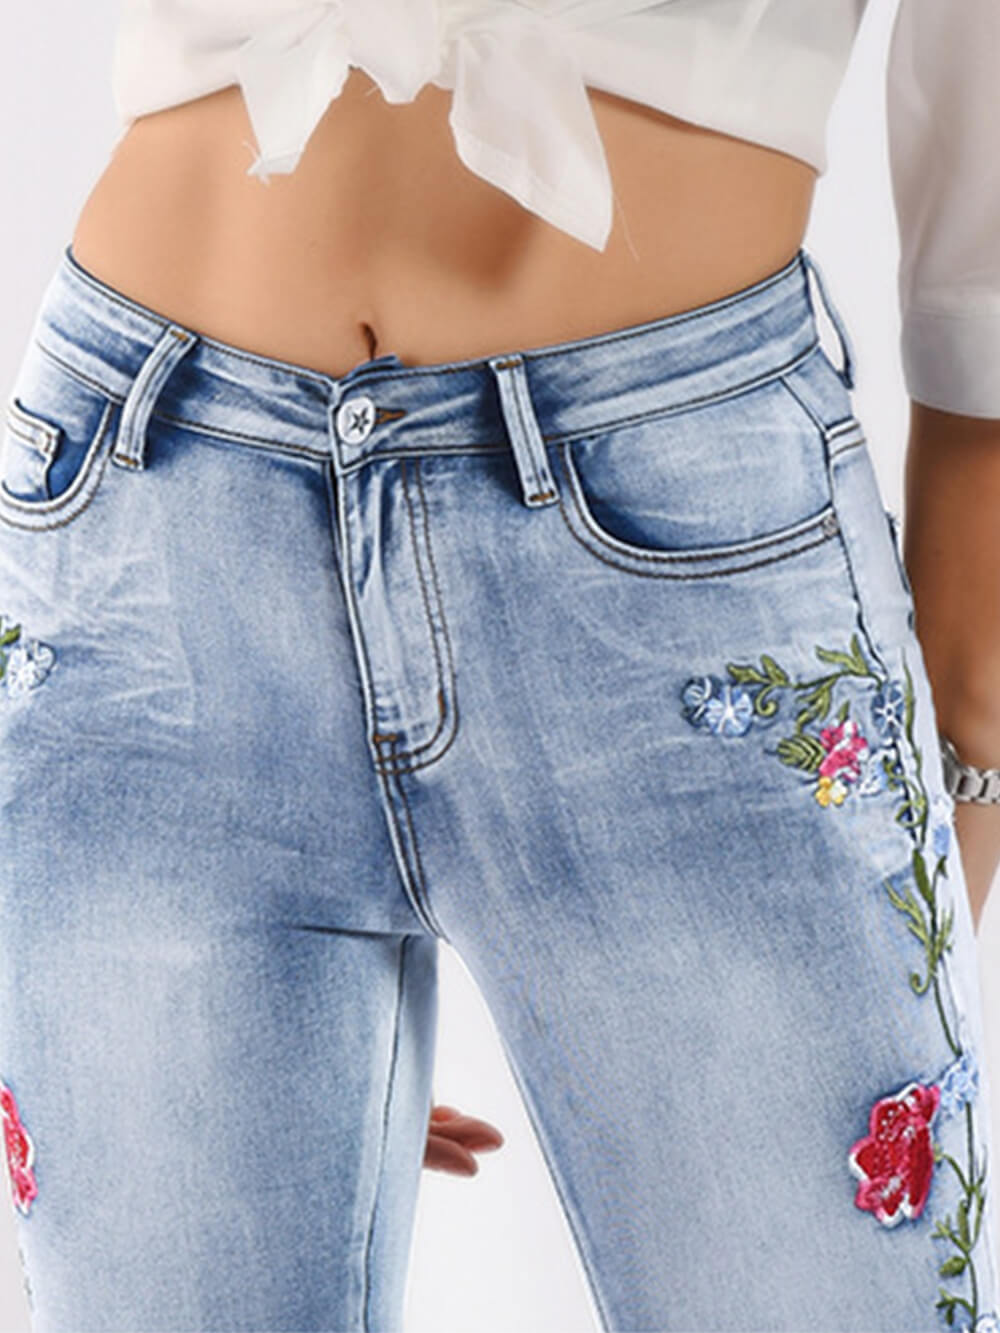 Three-Dimensional Embroidery Jeans